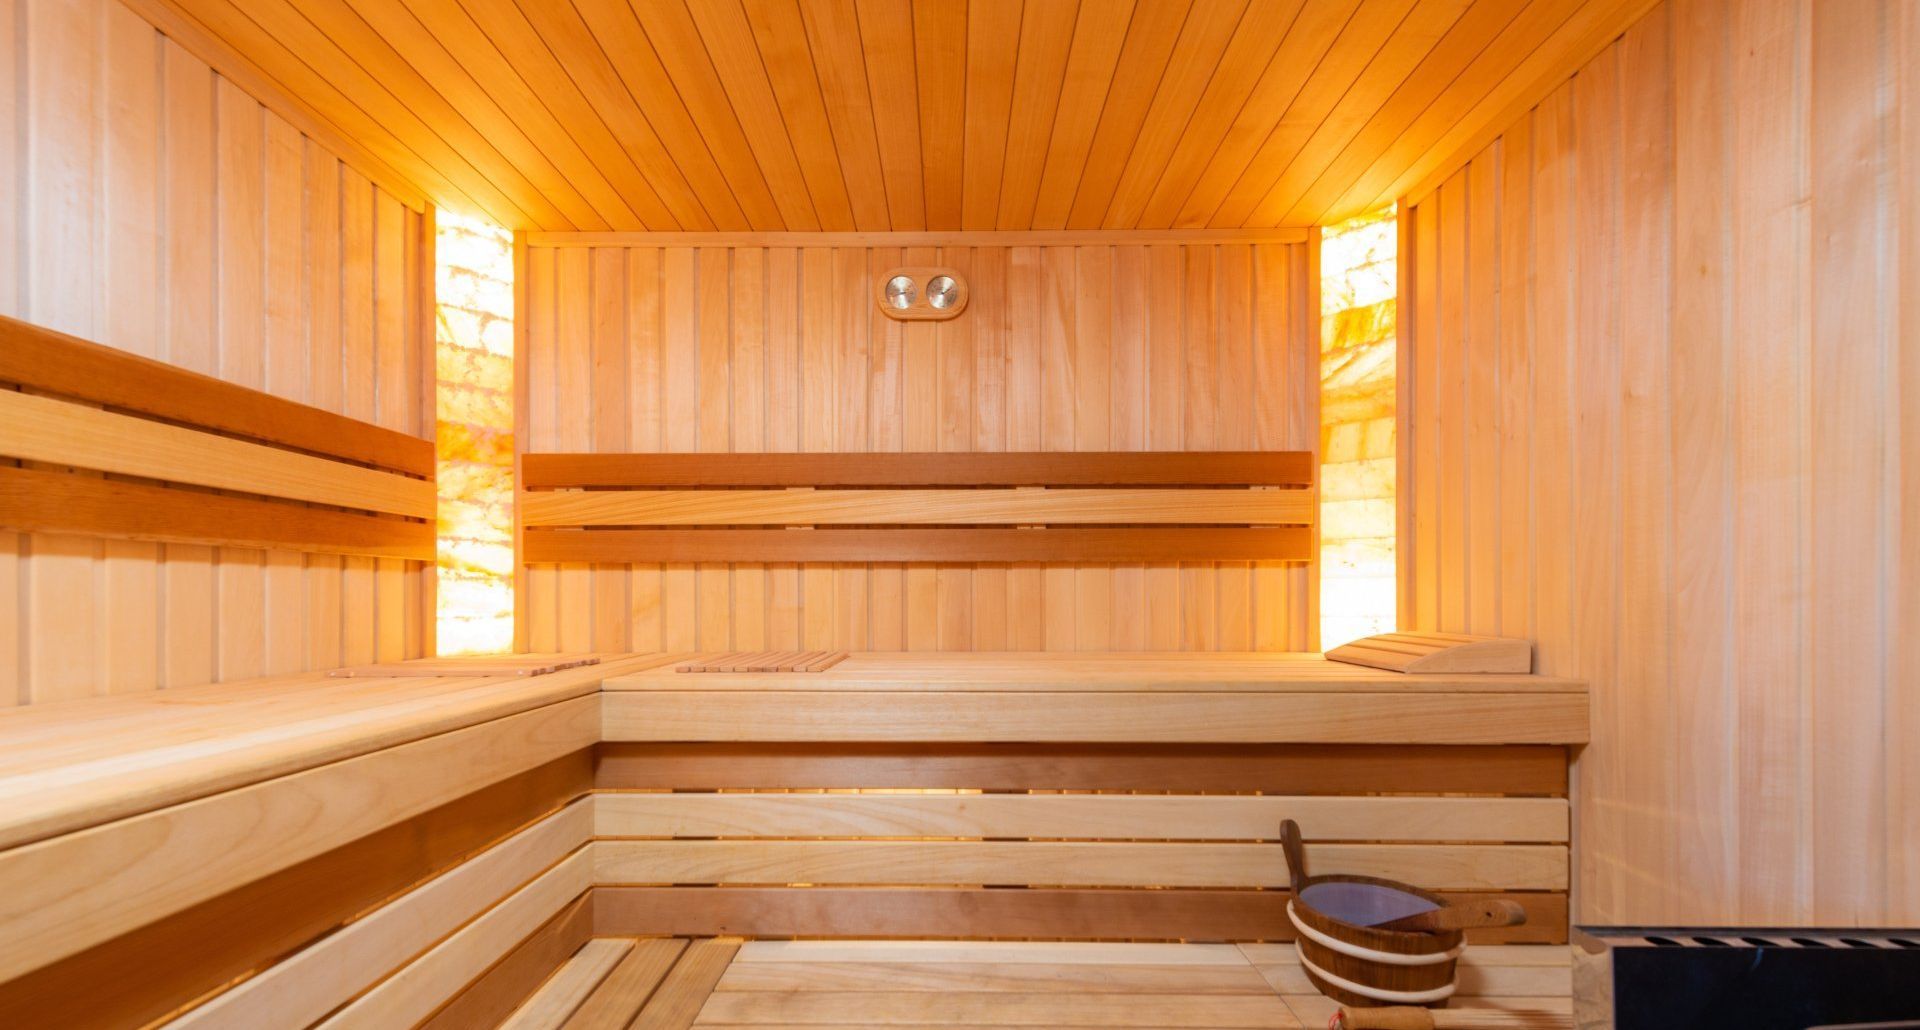 a wooden sauna with a bucket on the bench and sauna pillow